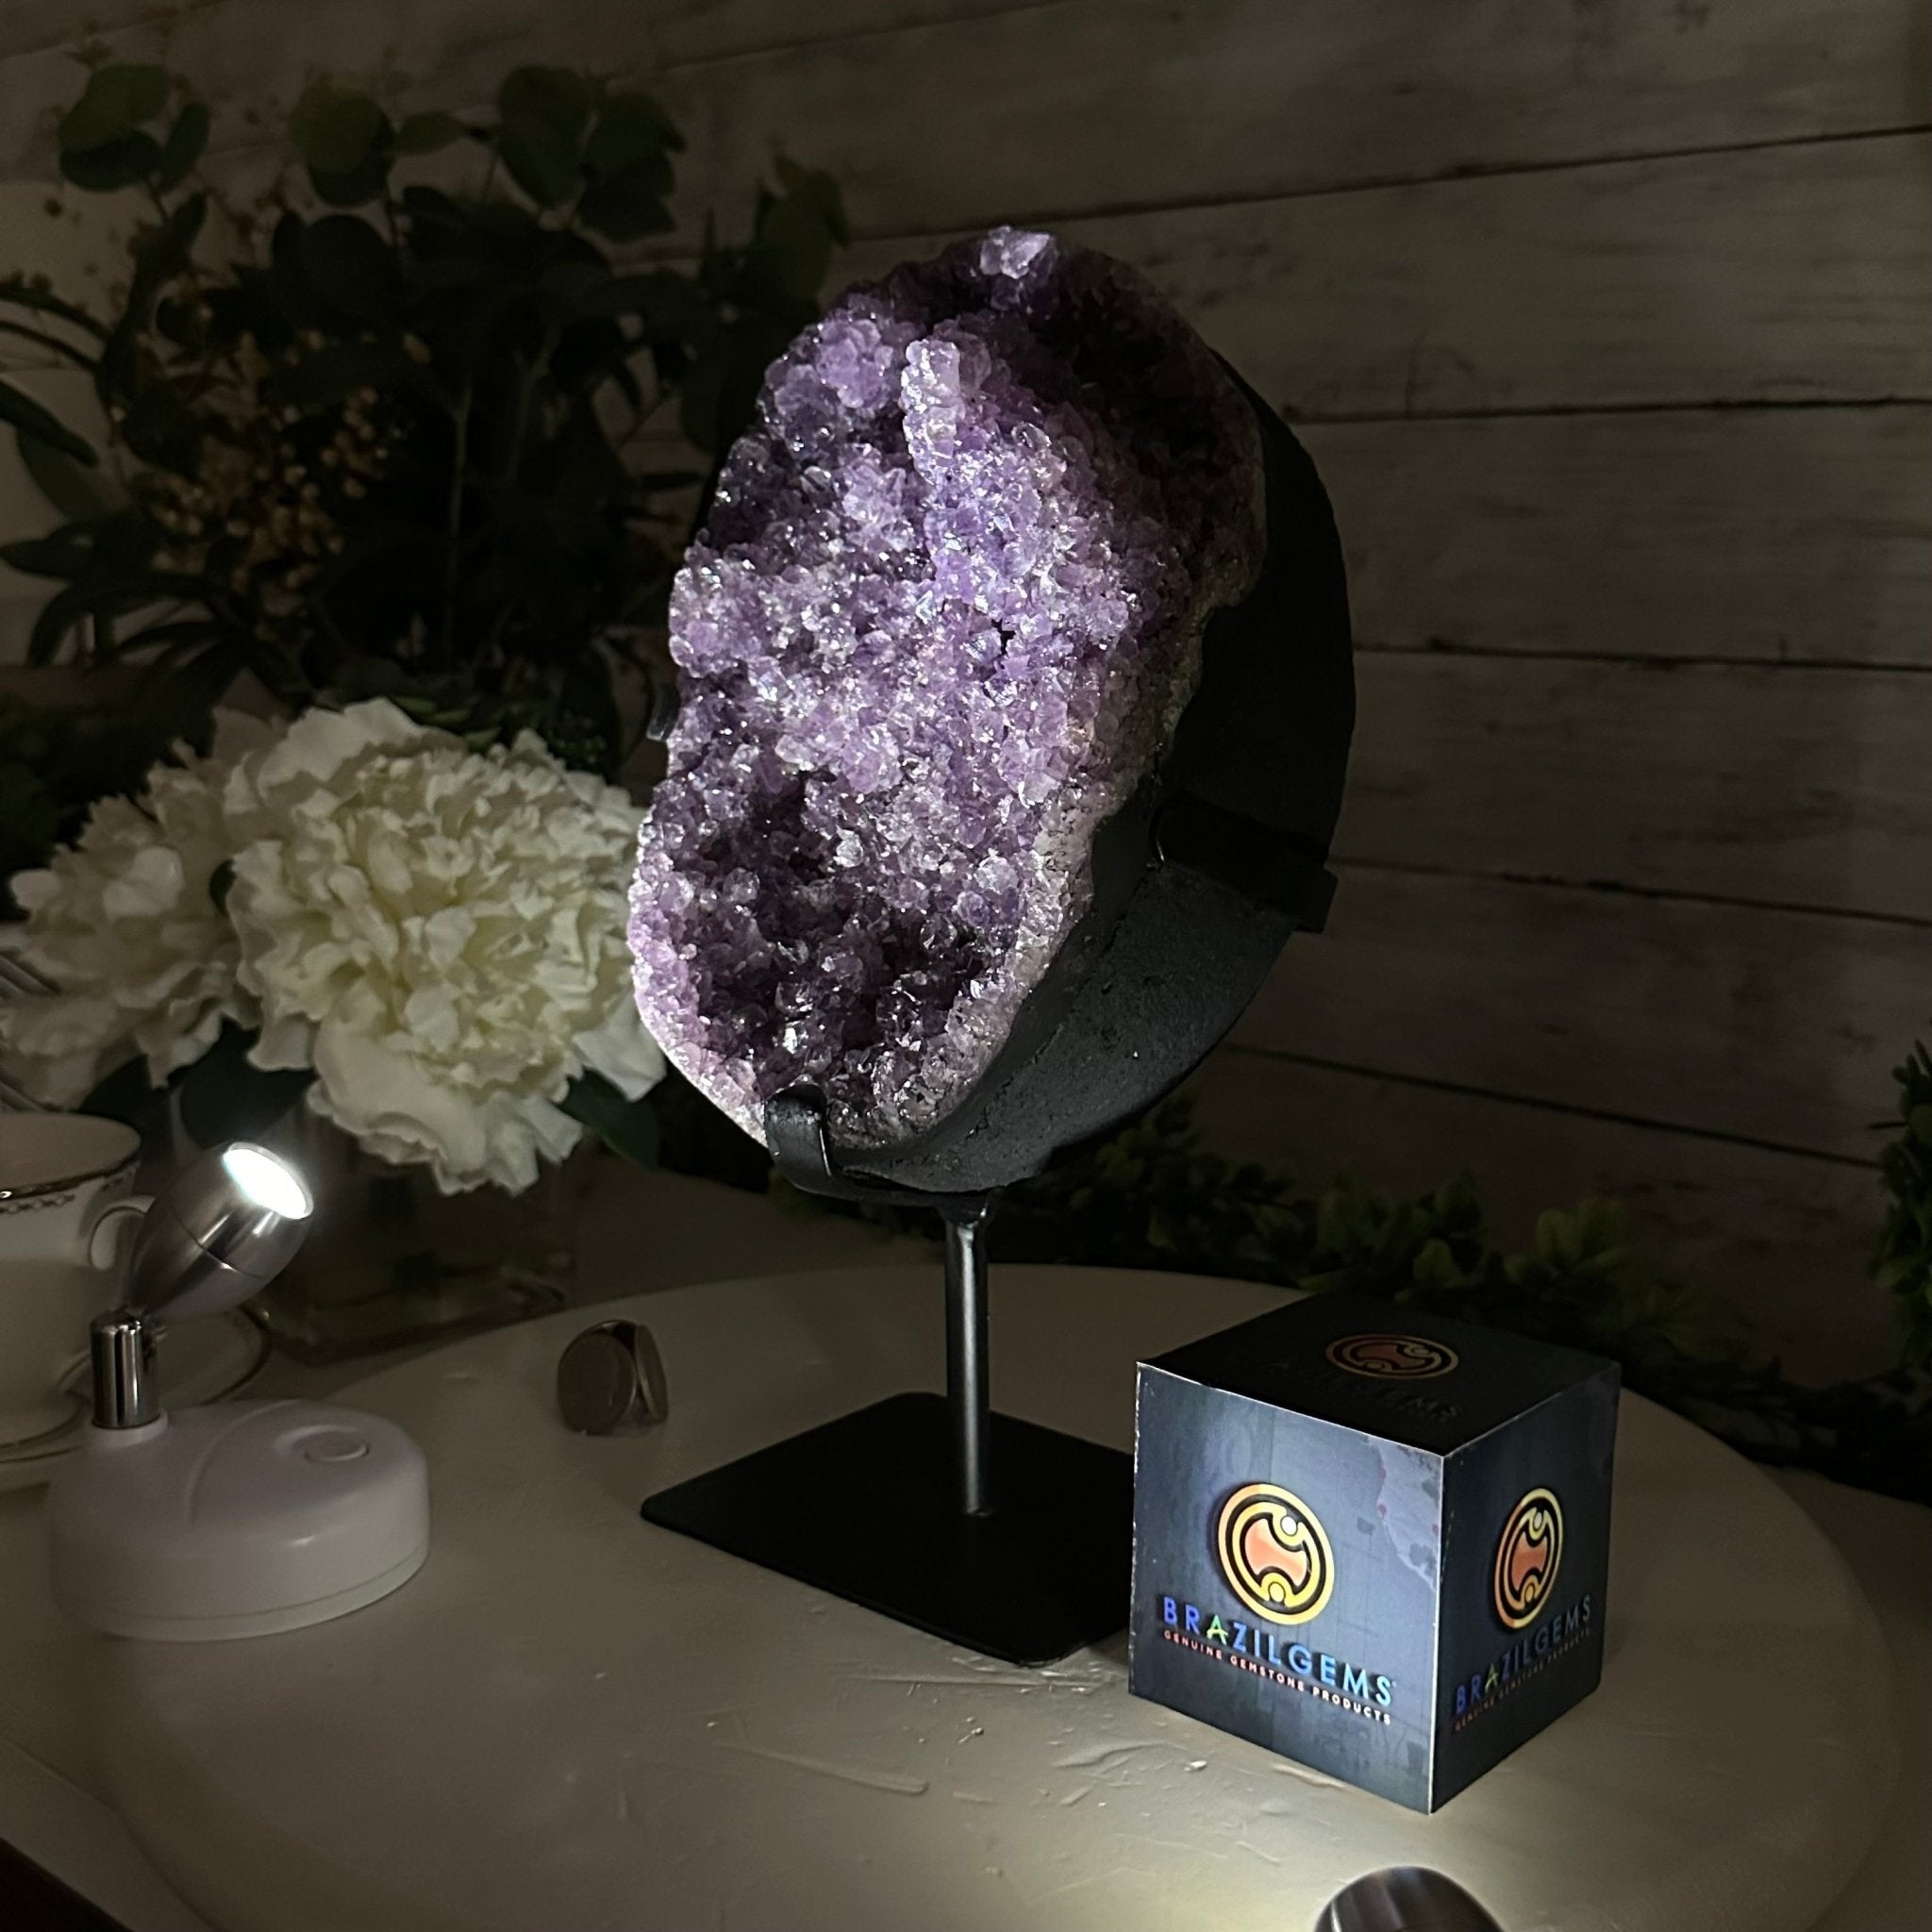 Quality Amethyst Cluster on a Metal Base, 10.1 lbs & 11" Tall #5491 - 0045 - Brazil GemsBrazil GemsQuality Amethyst Cluster on a Metal Base, 10.1 lbs & 11" Tall #5491 - 0045Clusters on Fixed Bases5491 - 0045